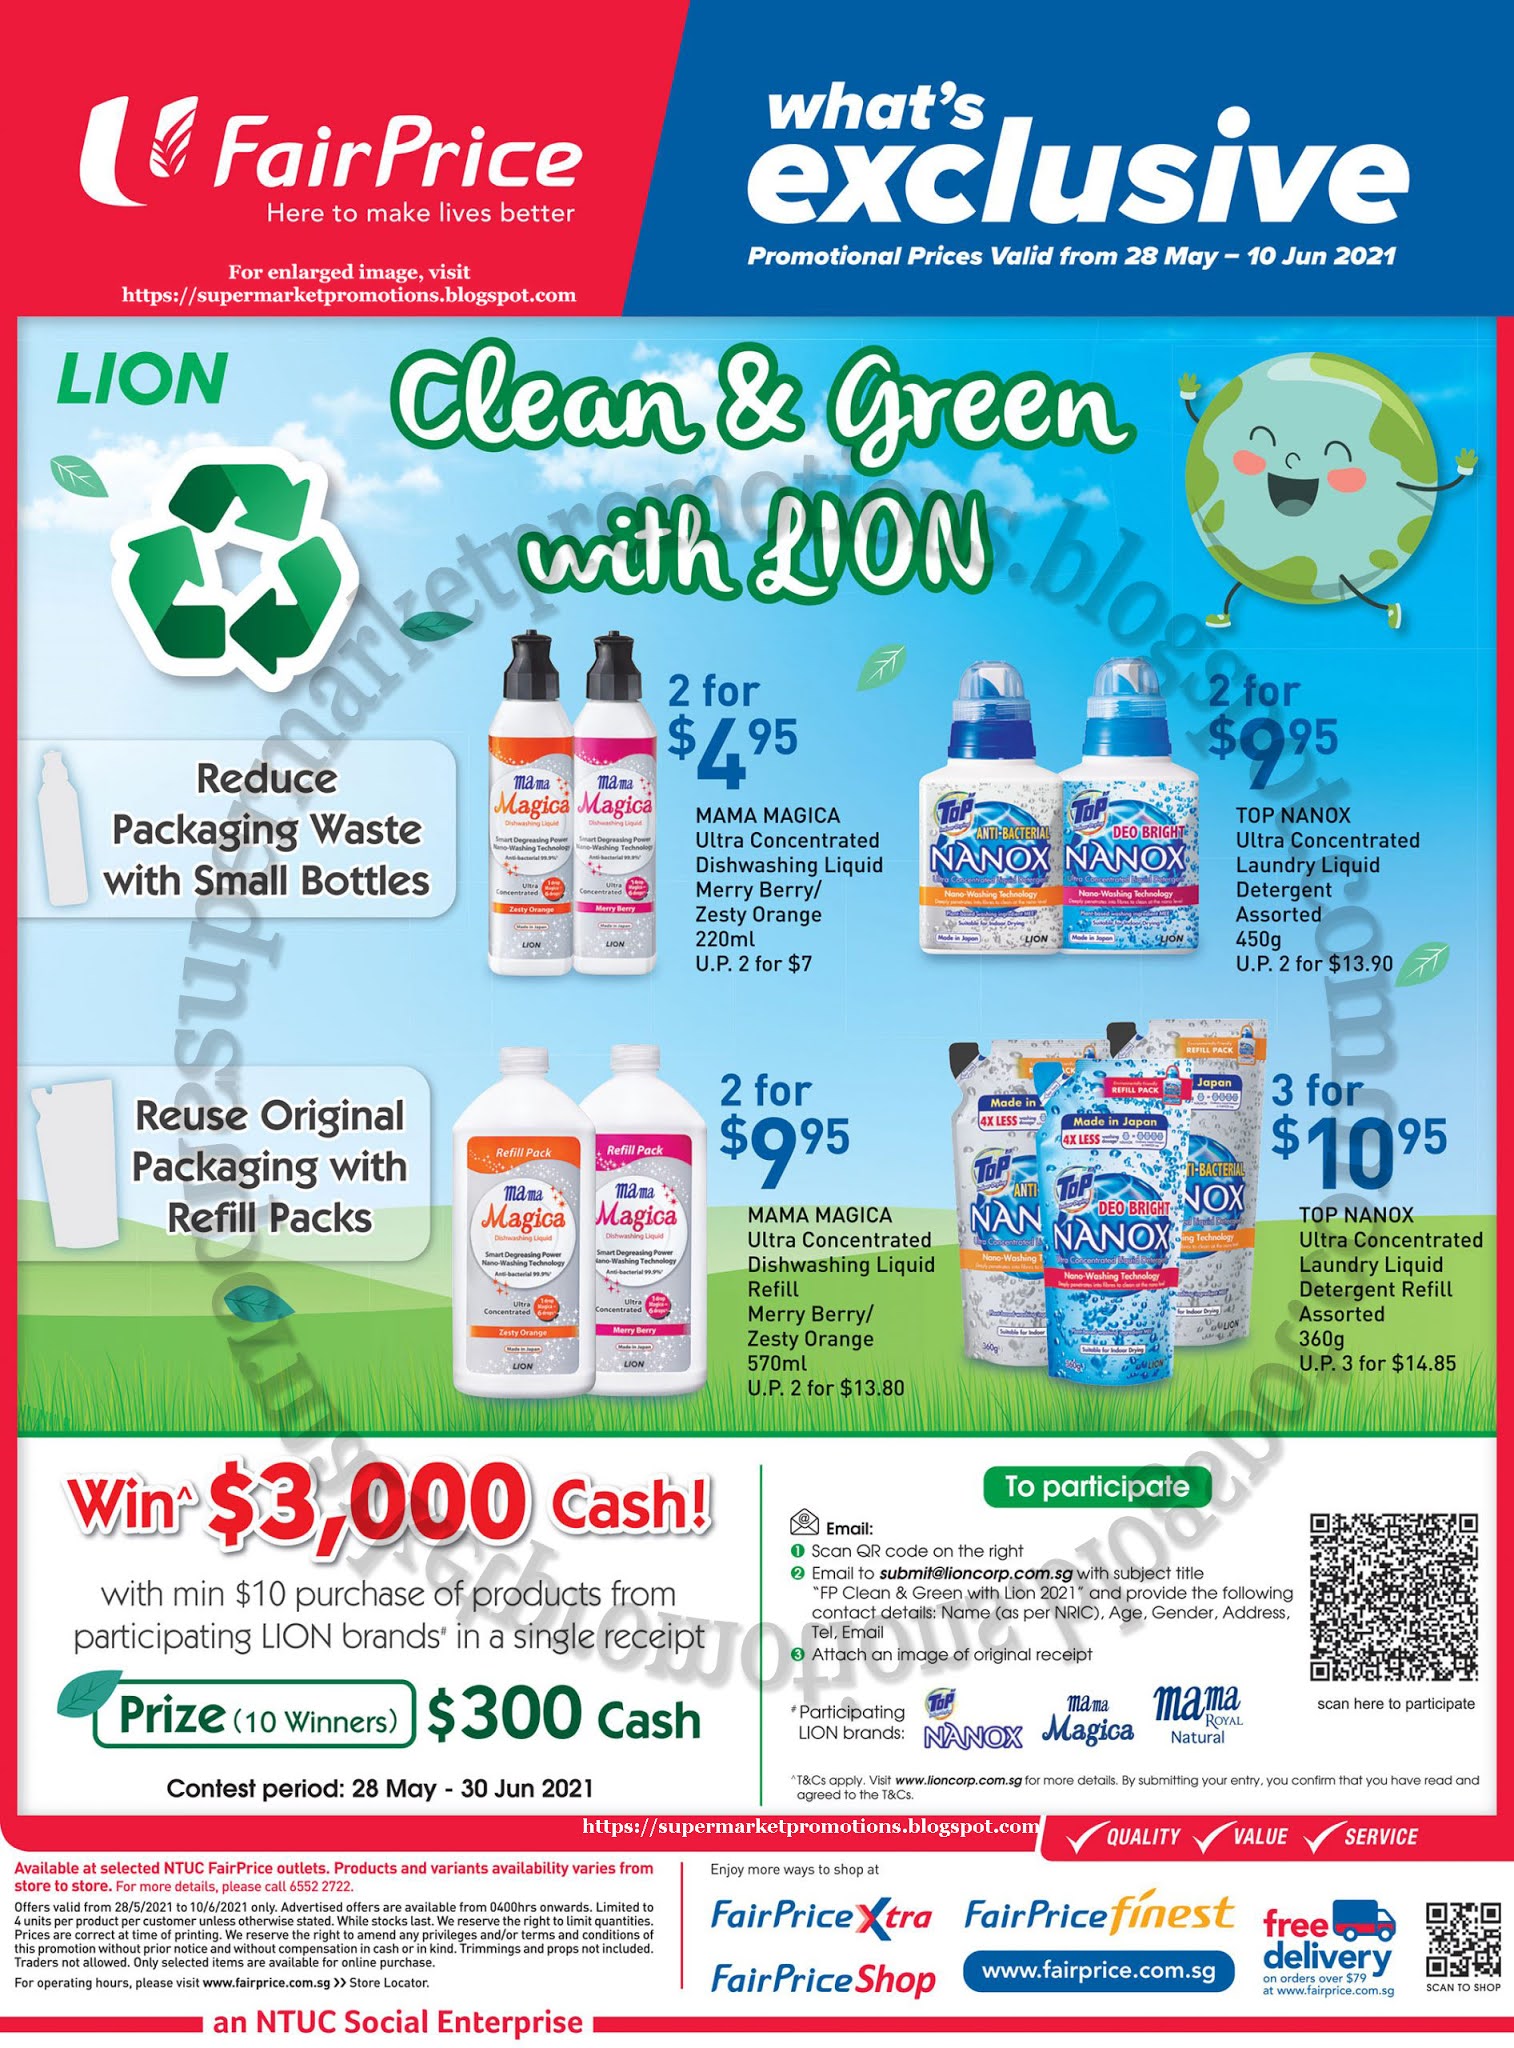 Ntuc Fairprice Lion Win 3 000 Cash Promotion 28 May 10 June 2021 Supermarket Promotions